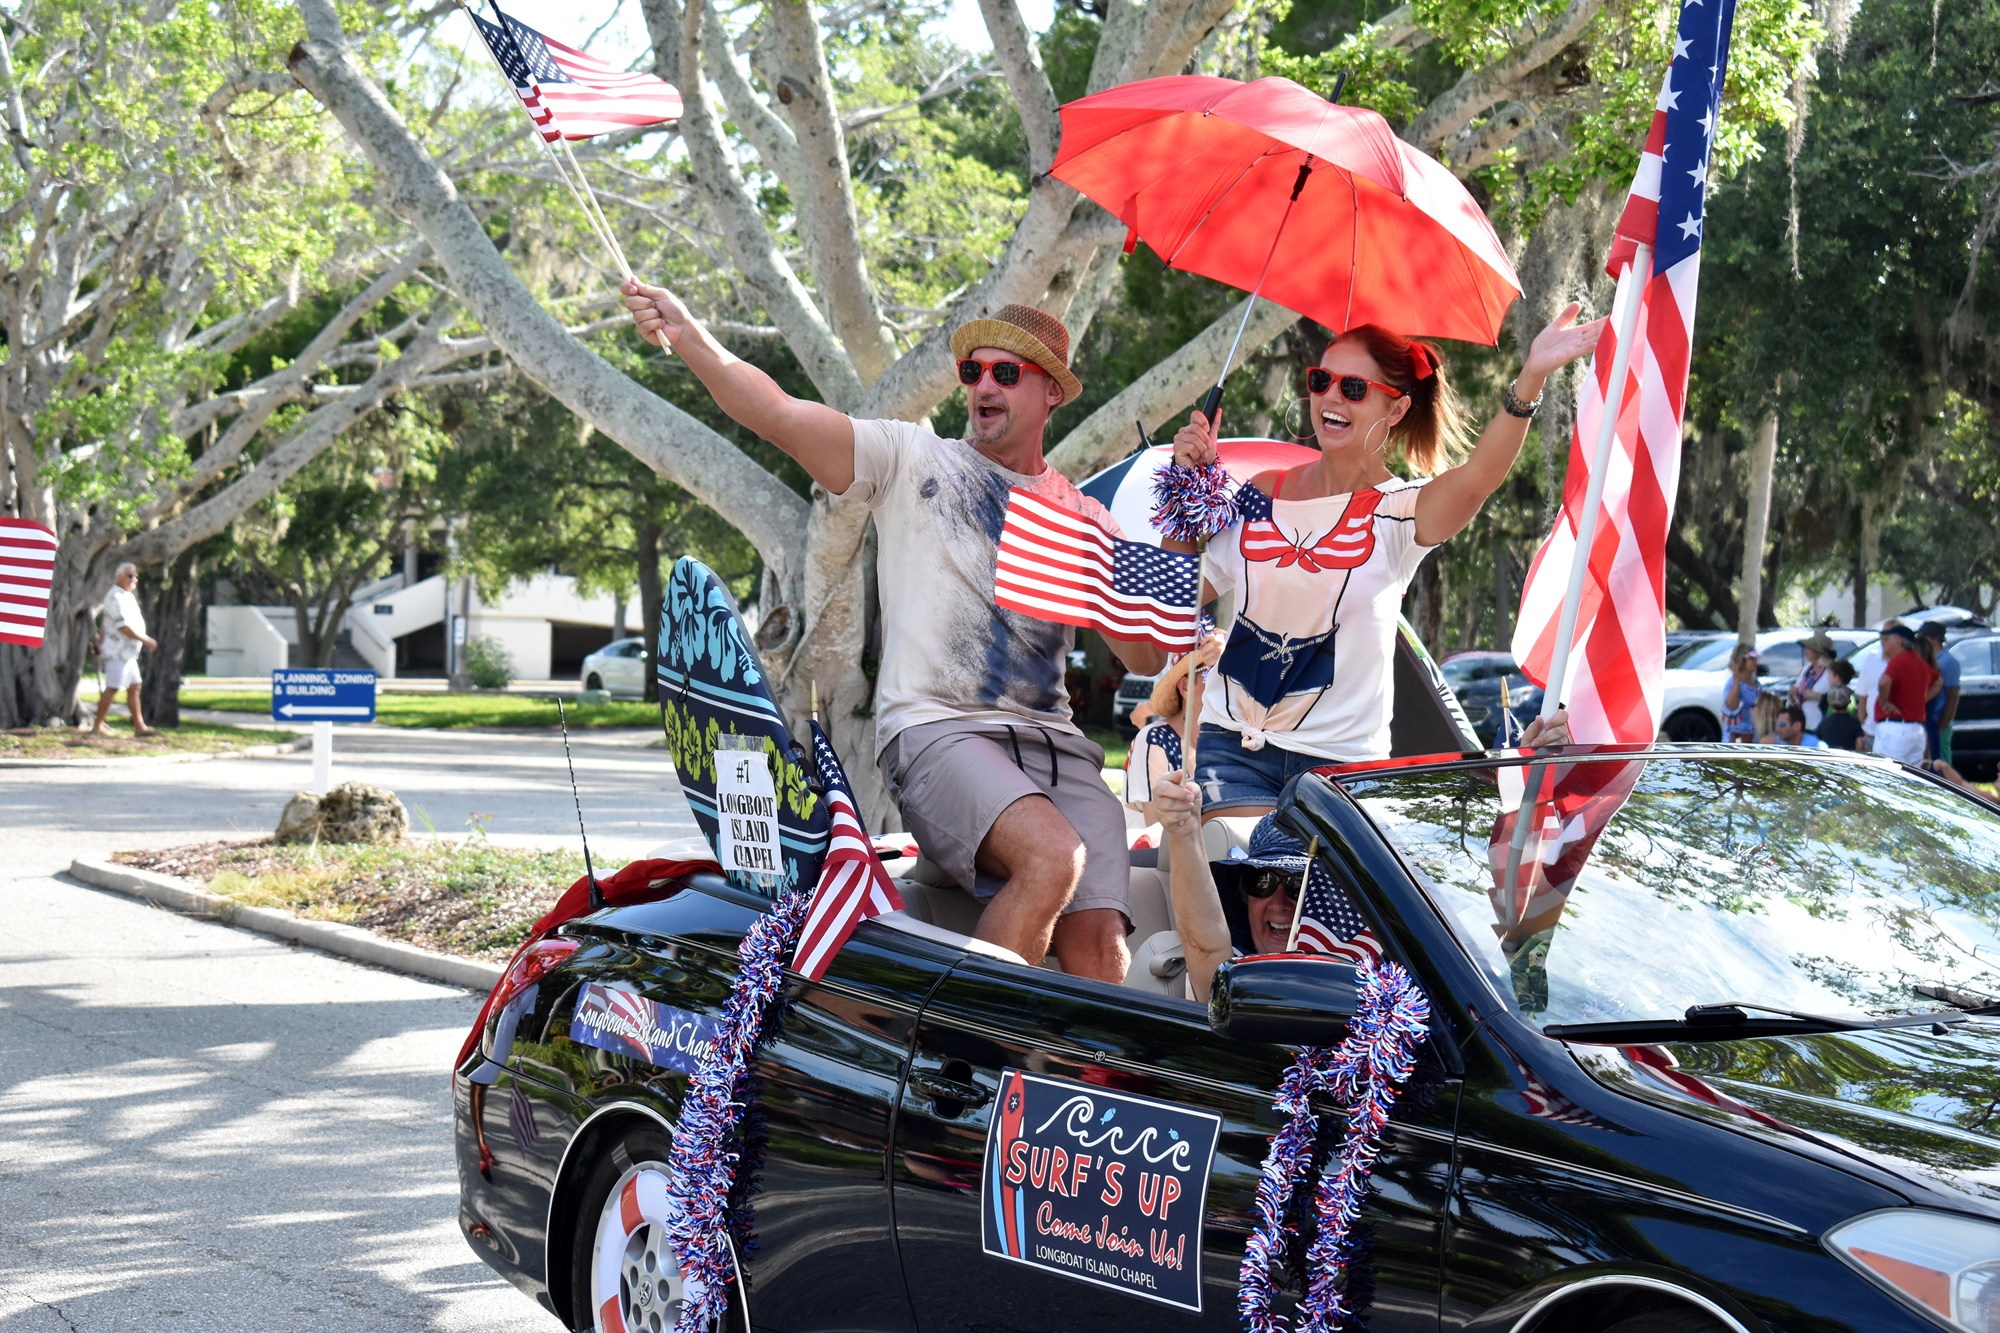 Chad Myers and Joanna Wnuk wave to the crowd during the 2018 Freedom Fest parade.